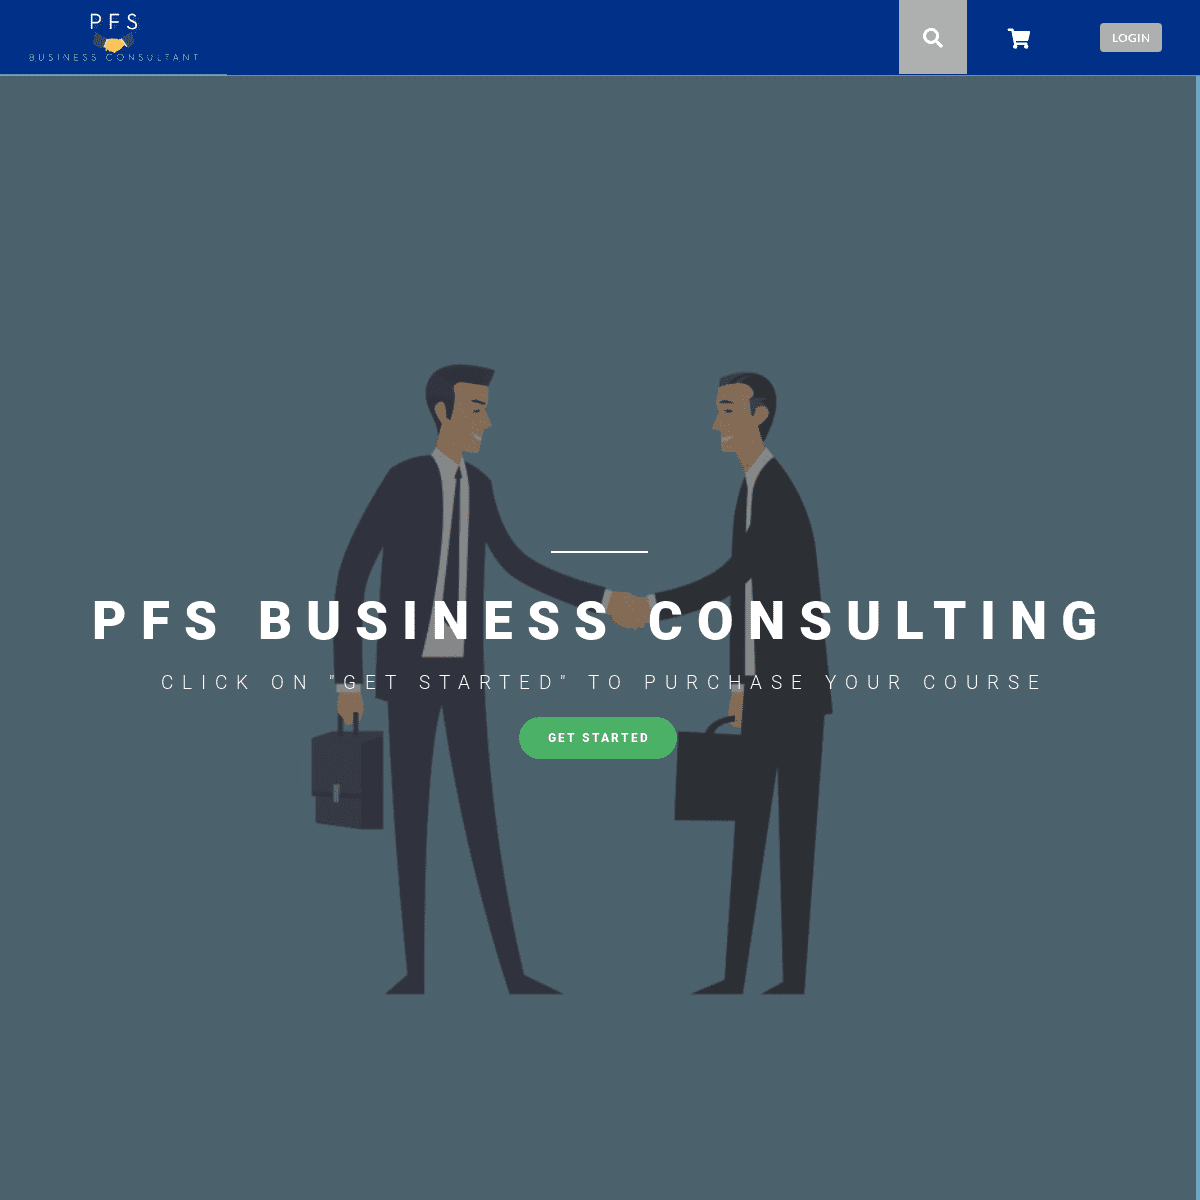 A complete backup of pfsbusinessconsulting.com